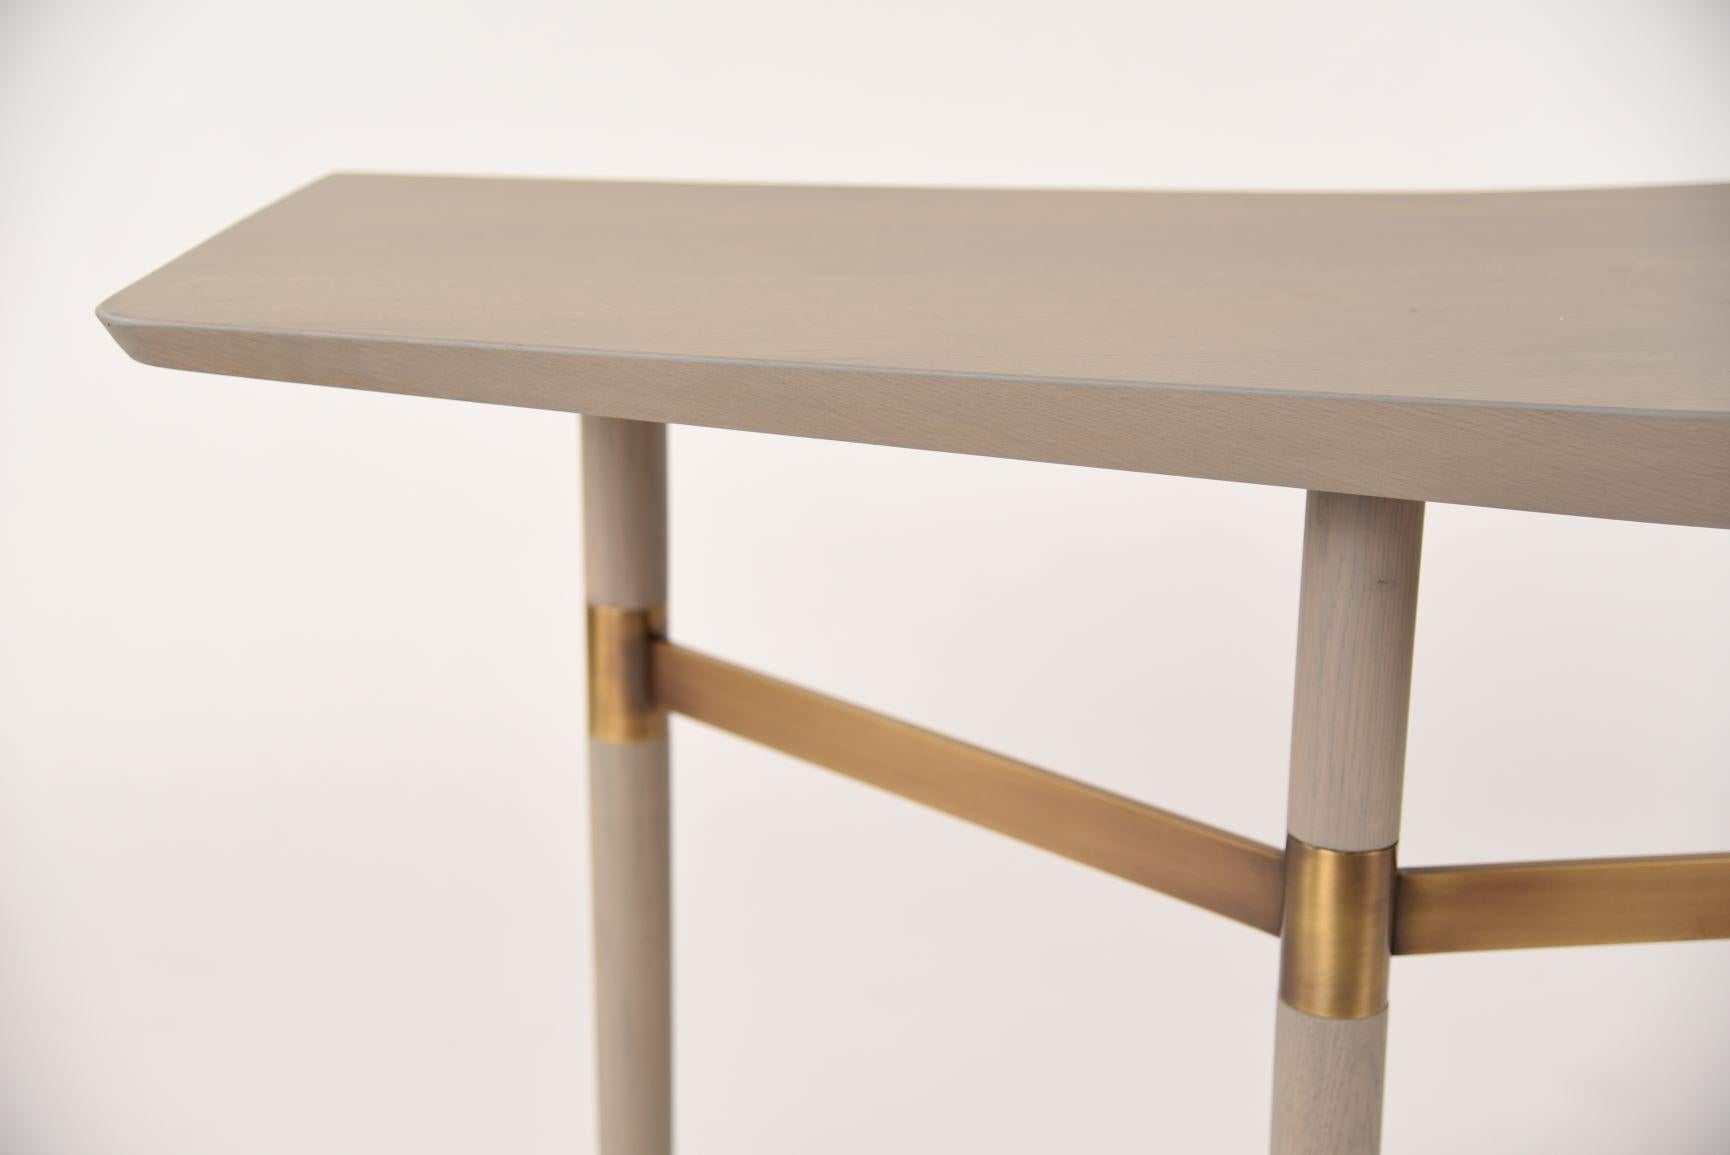 Darling Point Desk by Yabu Pushelberg in Mist Matte Lacquered Oak and Brass In New Condition For Sale In Toronto, ON